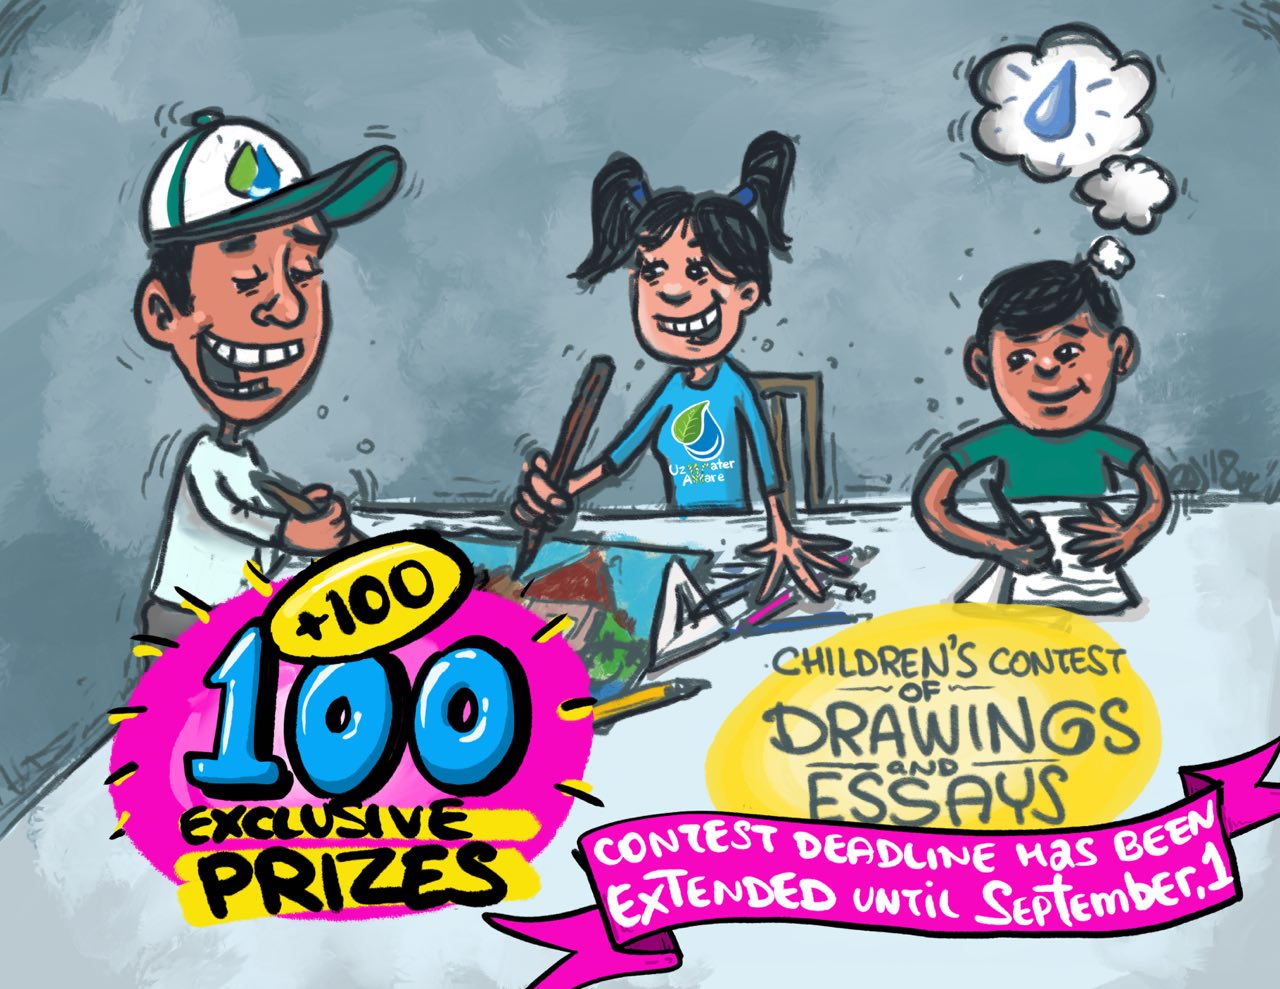  The Earth Protection Day: drawing and essay contest for children